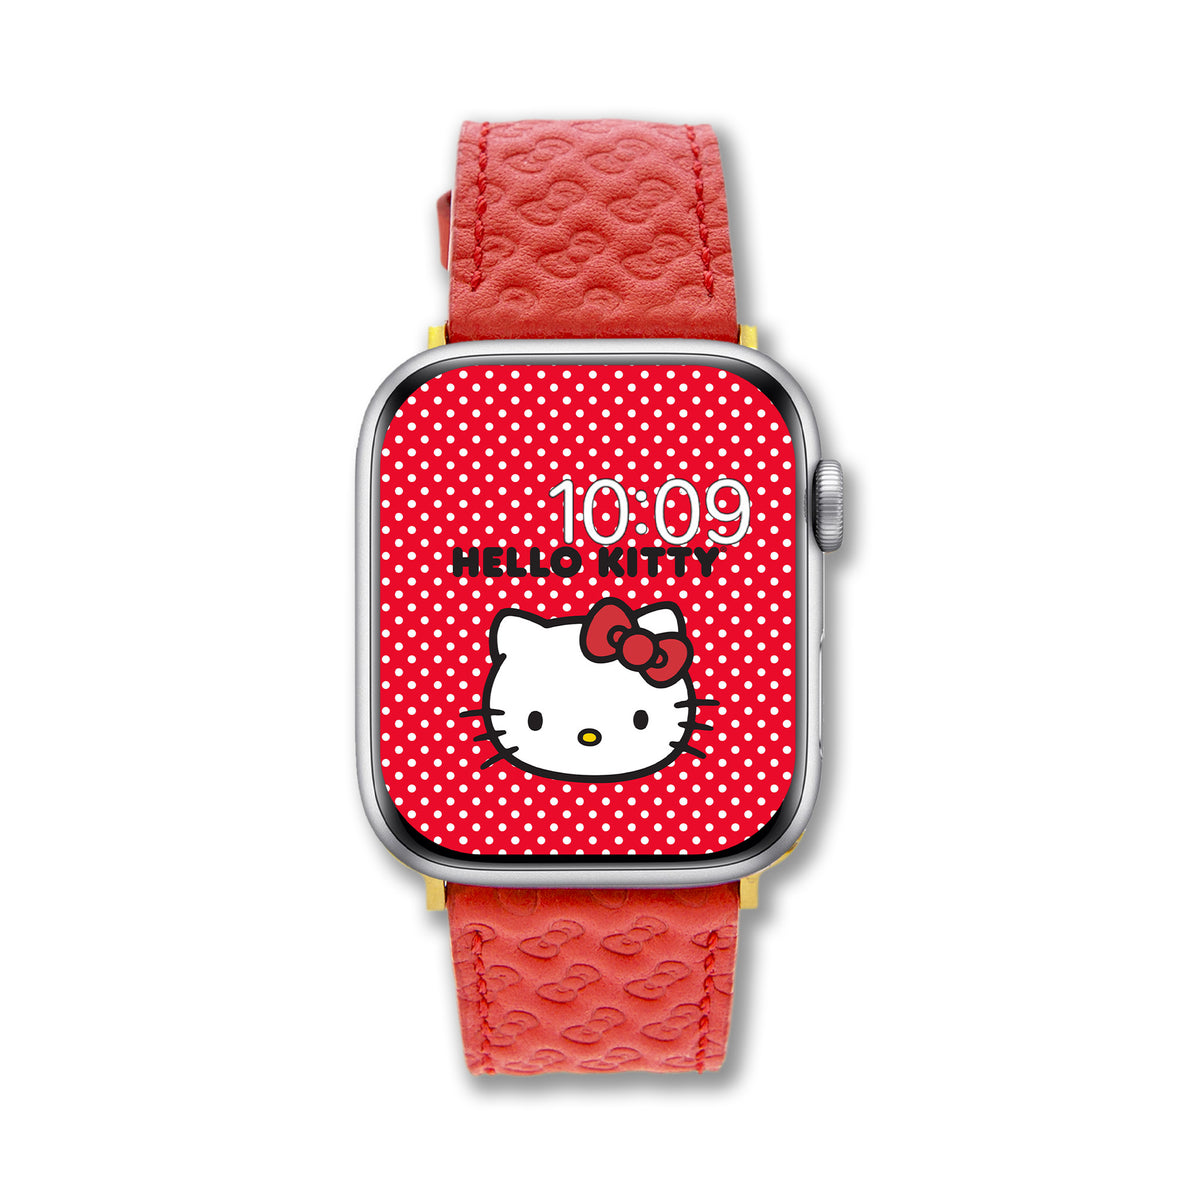 Hello Kitty x Sonix Red Bow Leather Watch Band Accessory BySonix Inc.   